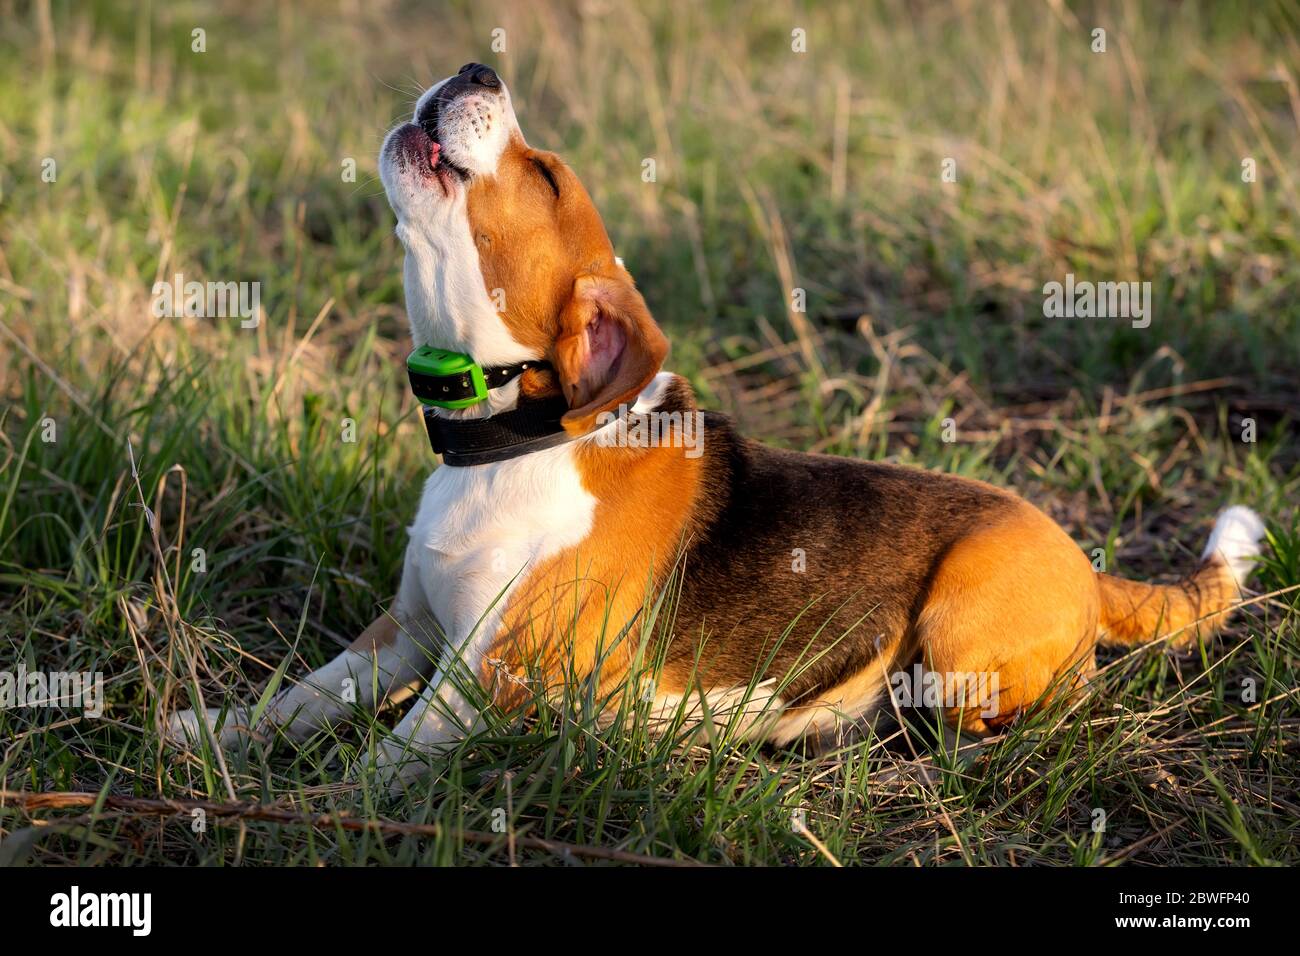 Cute beagle dog lying on the grass and barking Stock Photo